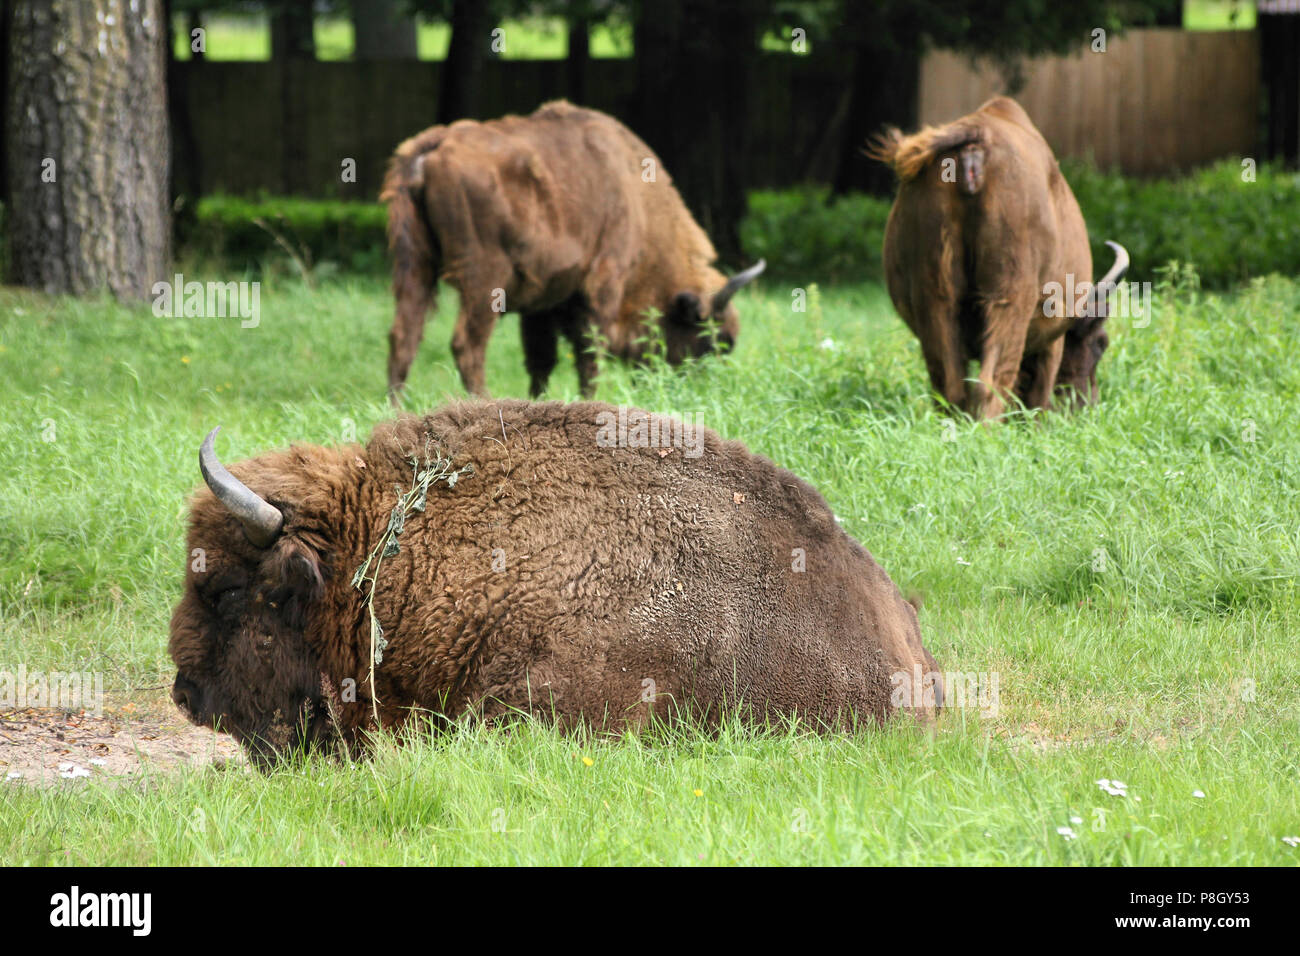 Bialowieza - national park and UNESCO World Heritage Site in Poland. European bison (Bison bonasus) also known as wisent. Stock Photo